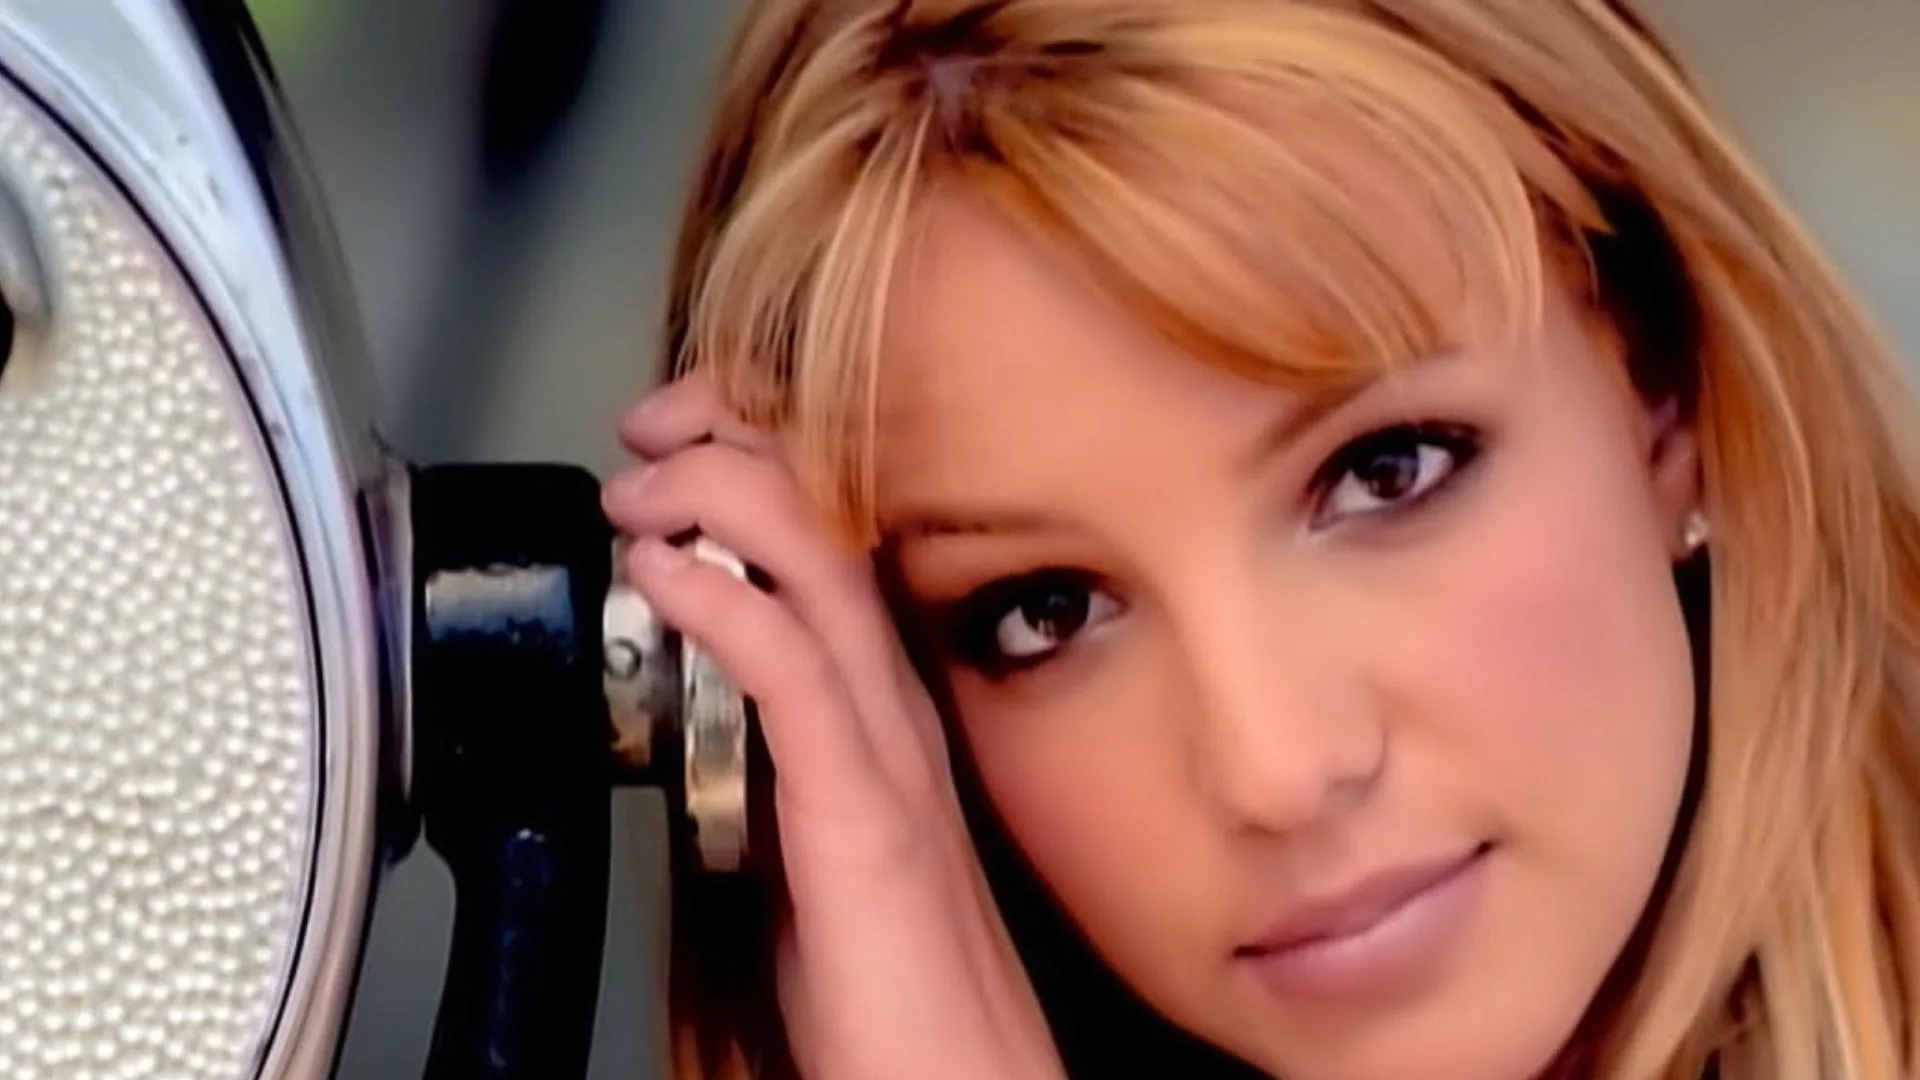 hollywood libro britney spears